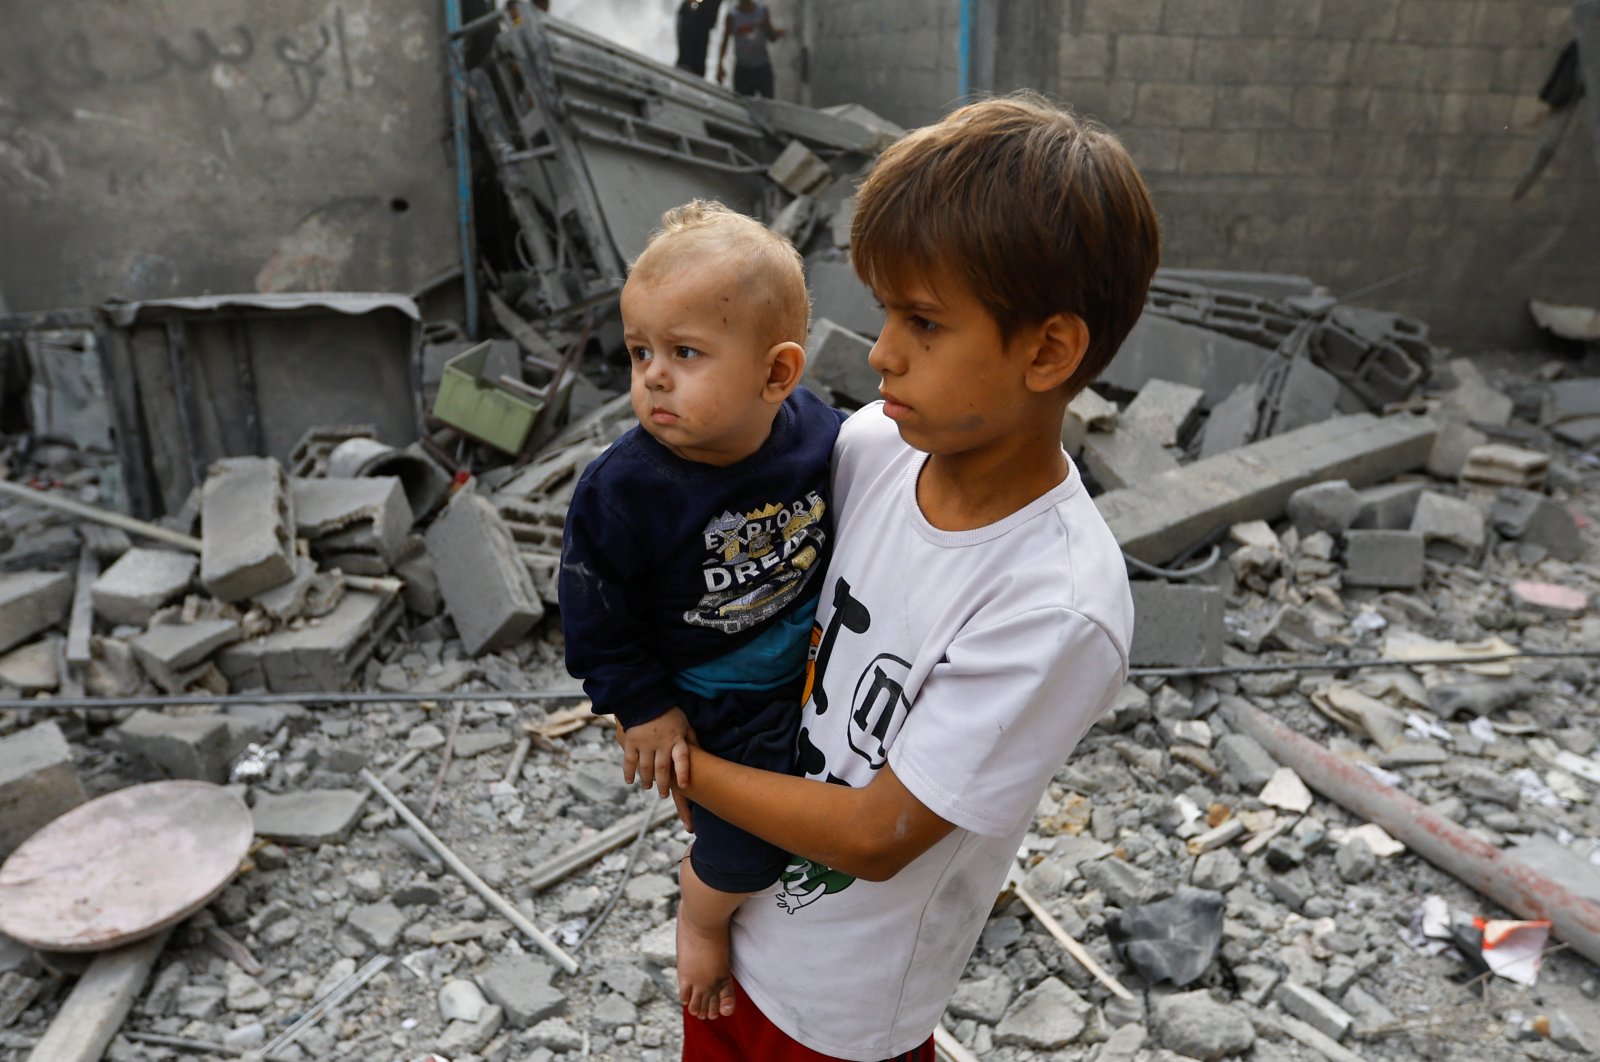 Palestinian children standing amid rubble look on during a search for casualties in the aftermath of Israeli strikes on houses, in Khan Younis, southern Gaza Strip, Oct. 25, 2023. (Reuters Photo)